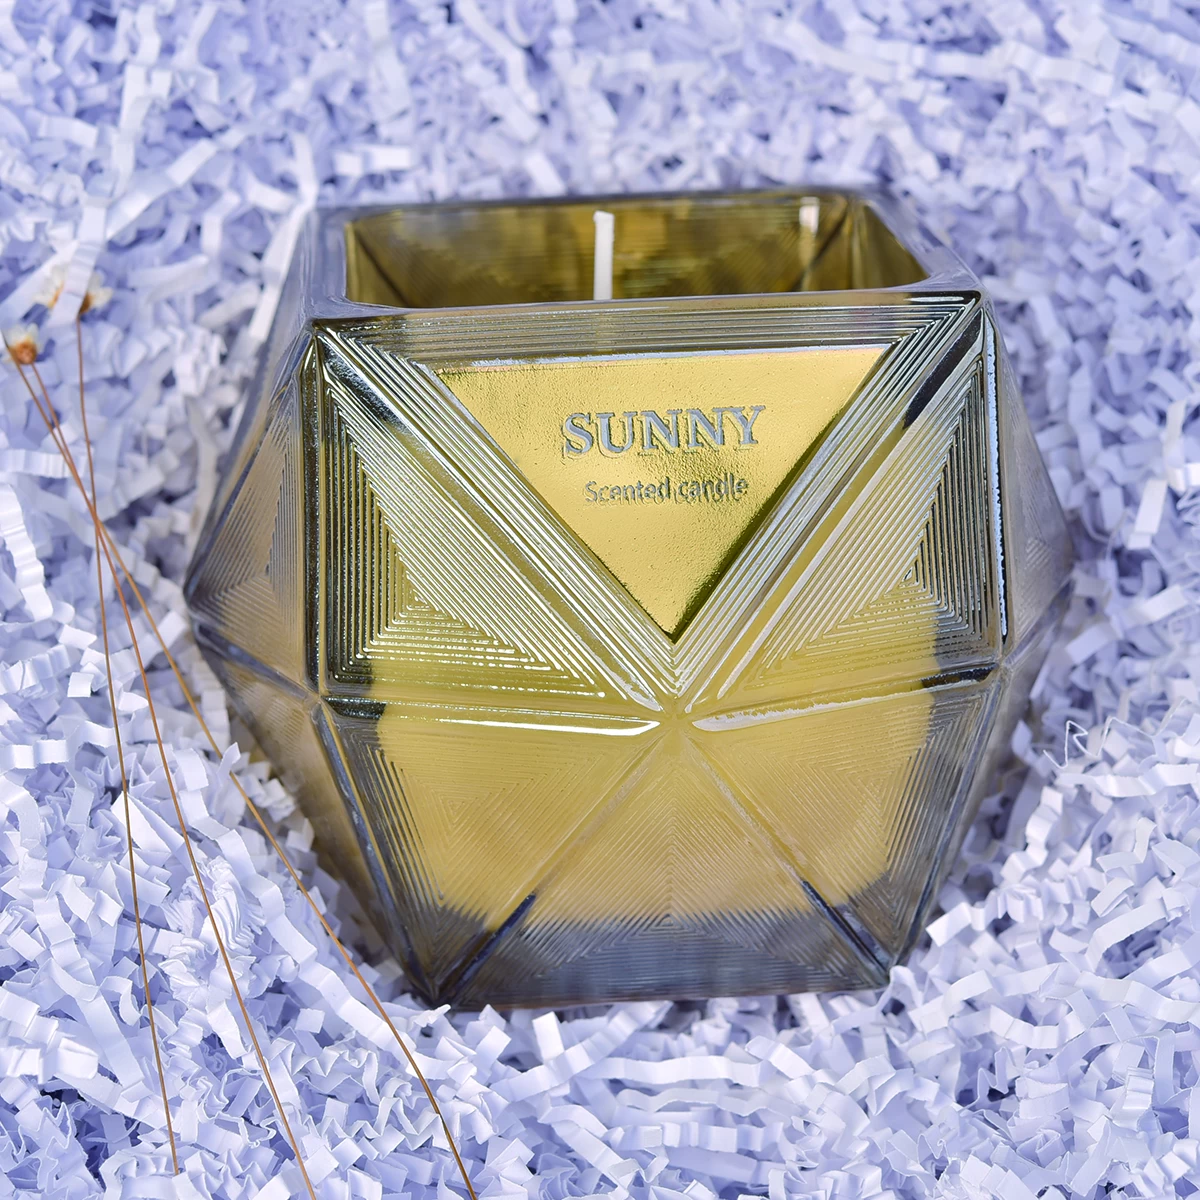 8oz Sunny scented Custom Hexagon colored glass candle jar